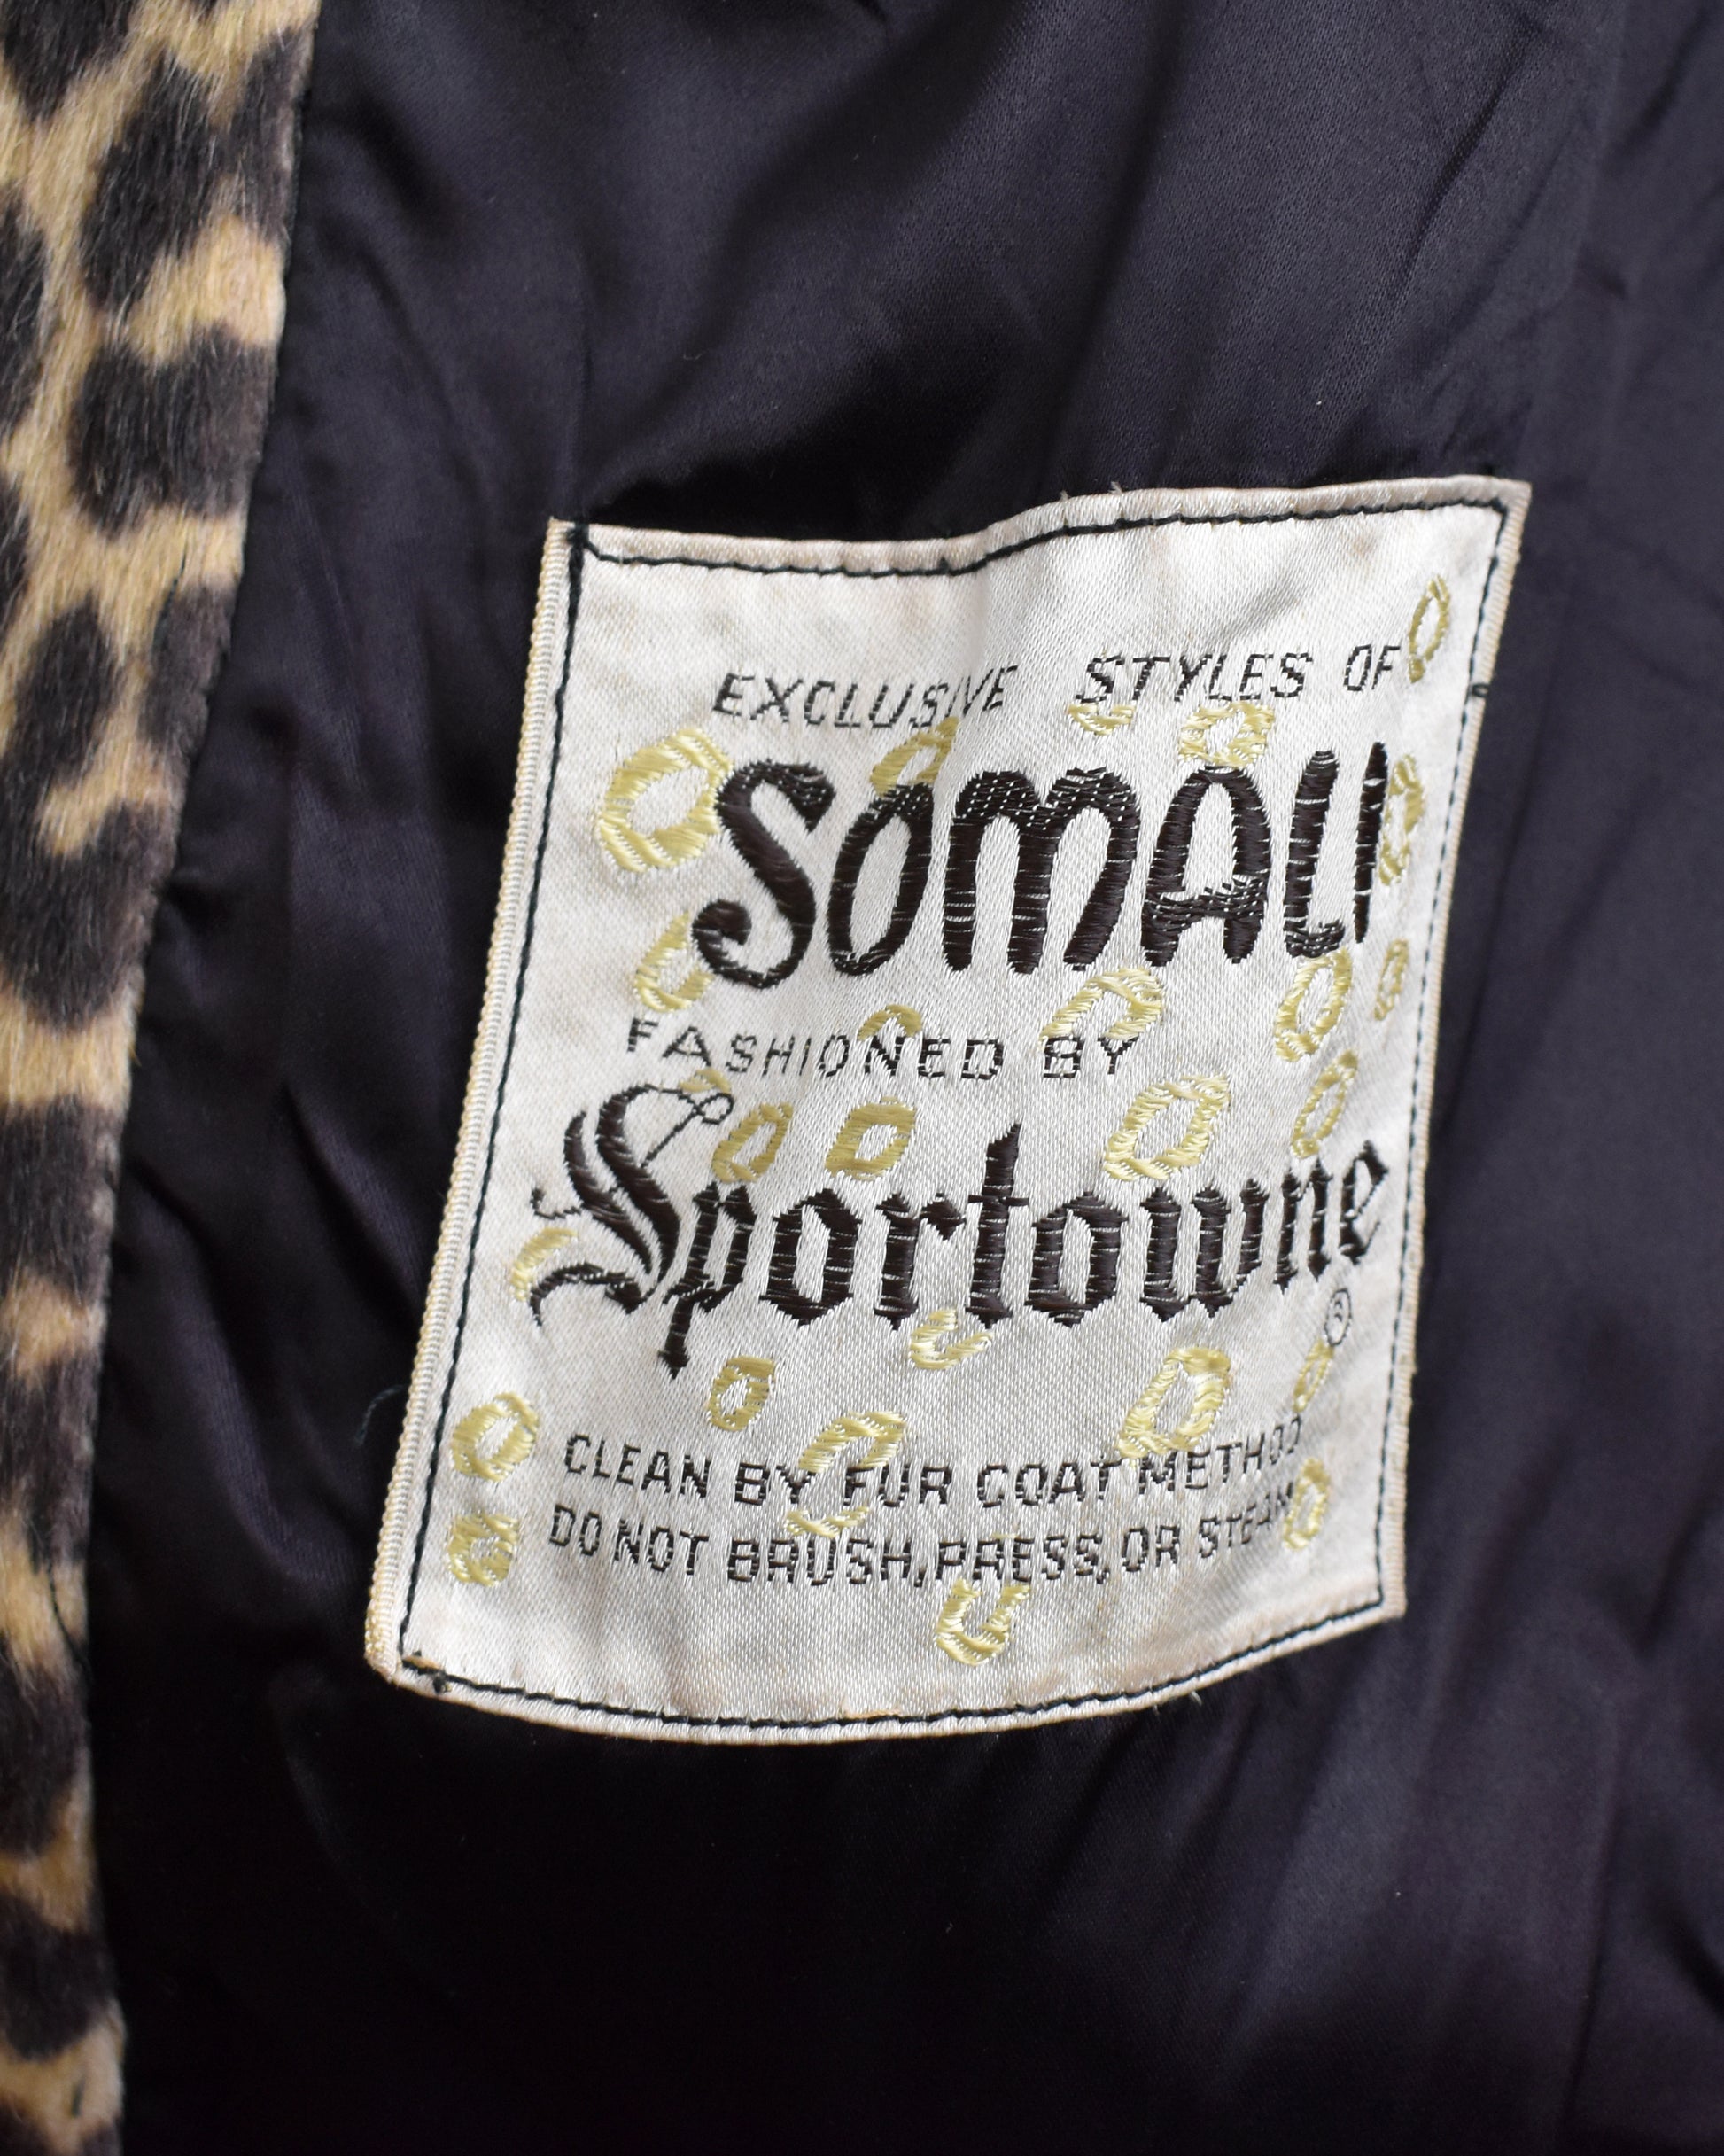 Close up of the inside tag that says Exclusive Styles of Somali Fashioned by Sportowne